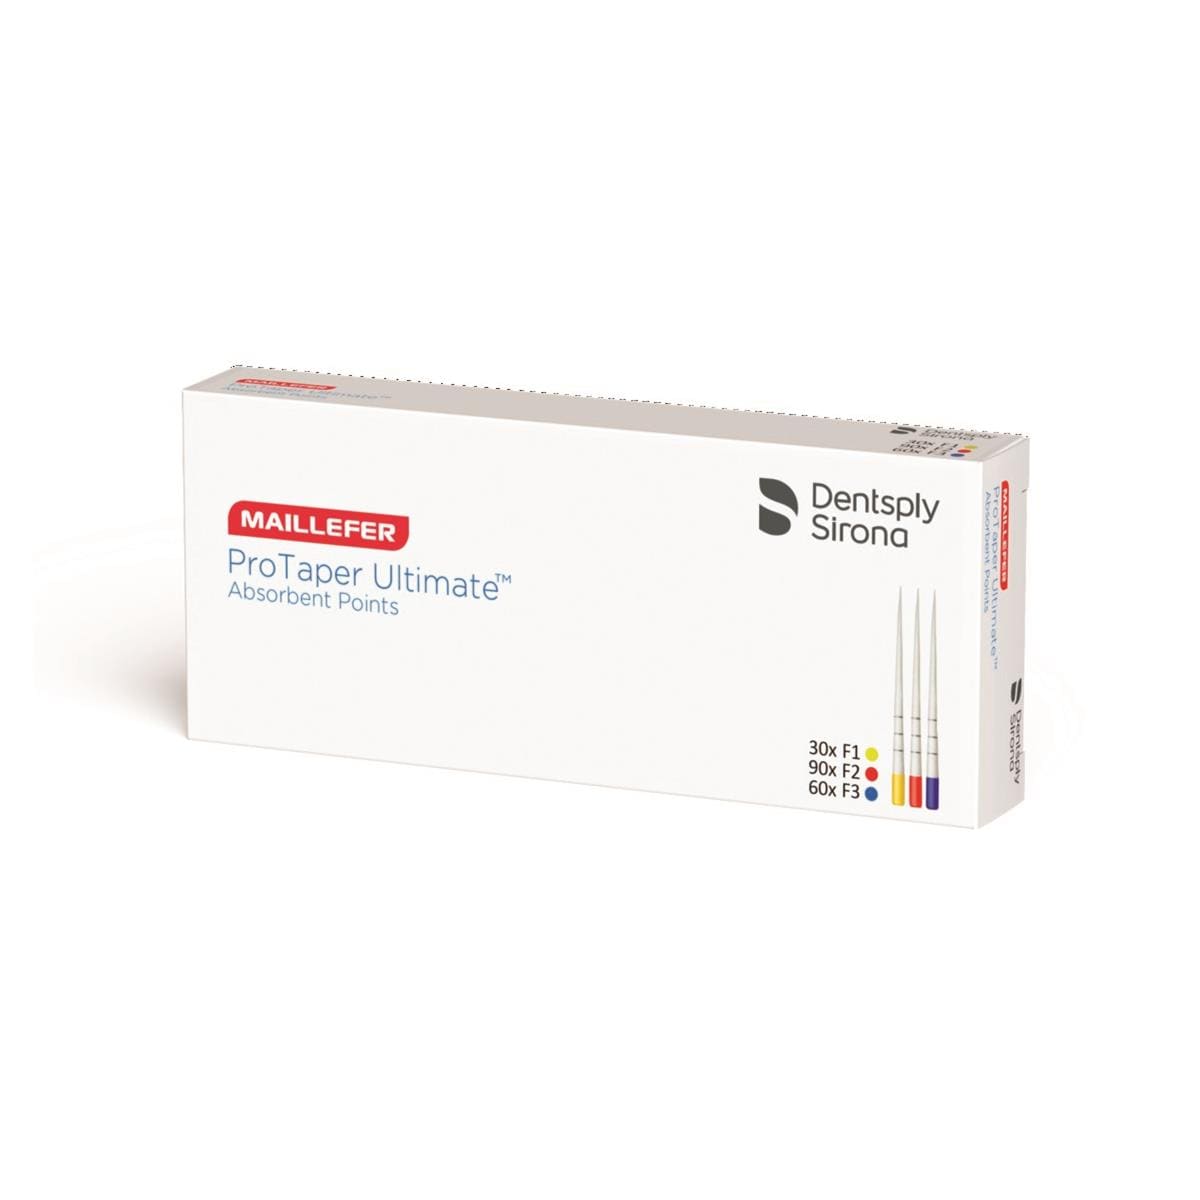 ProTaper Ultimate Absorbent Point FXL (bote de 180) Dentsply Sirona